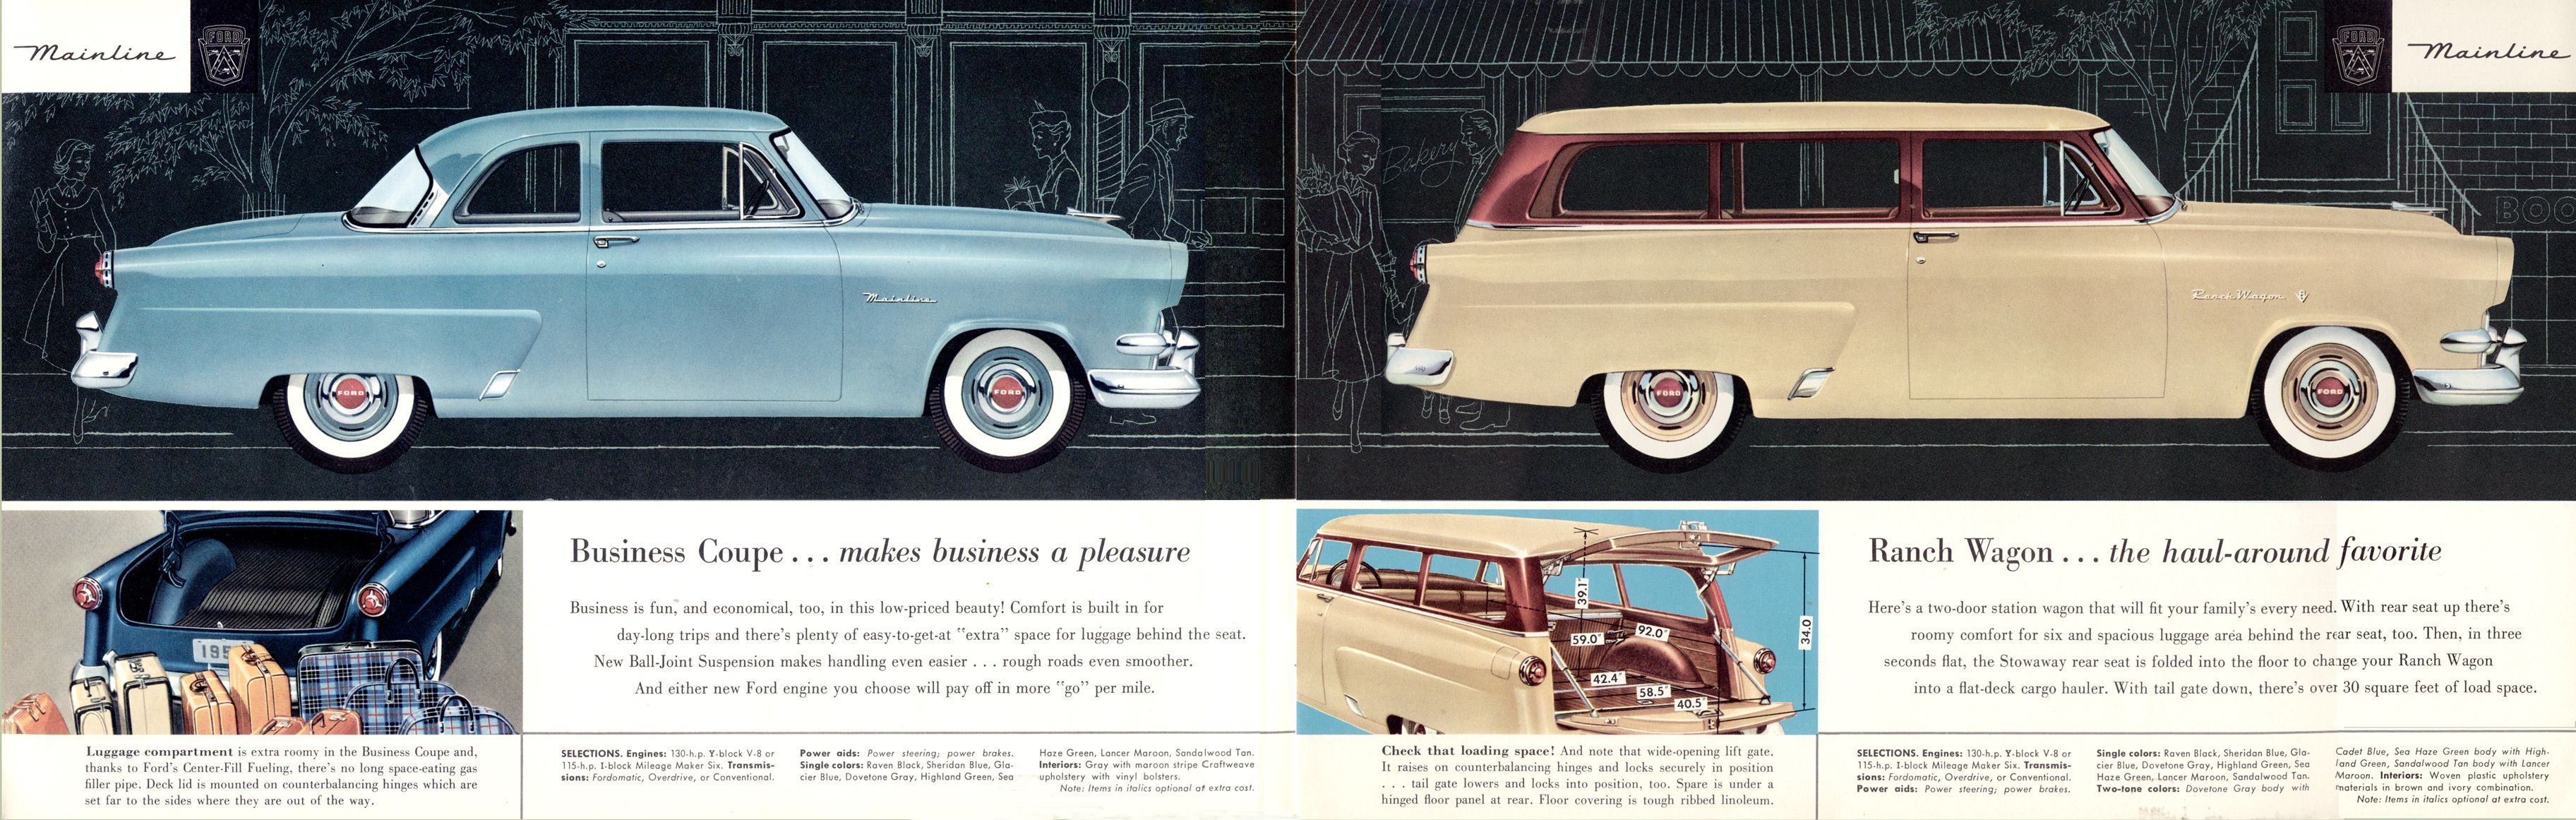 1954 Ford Brochure Page 4